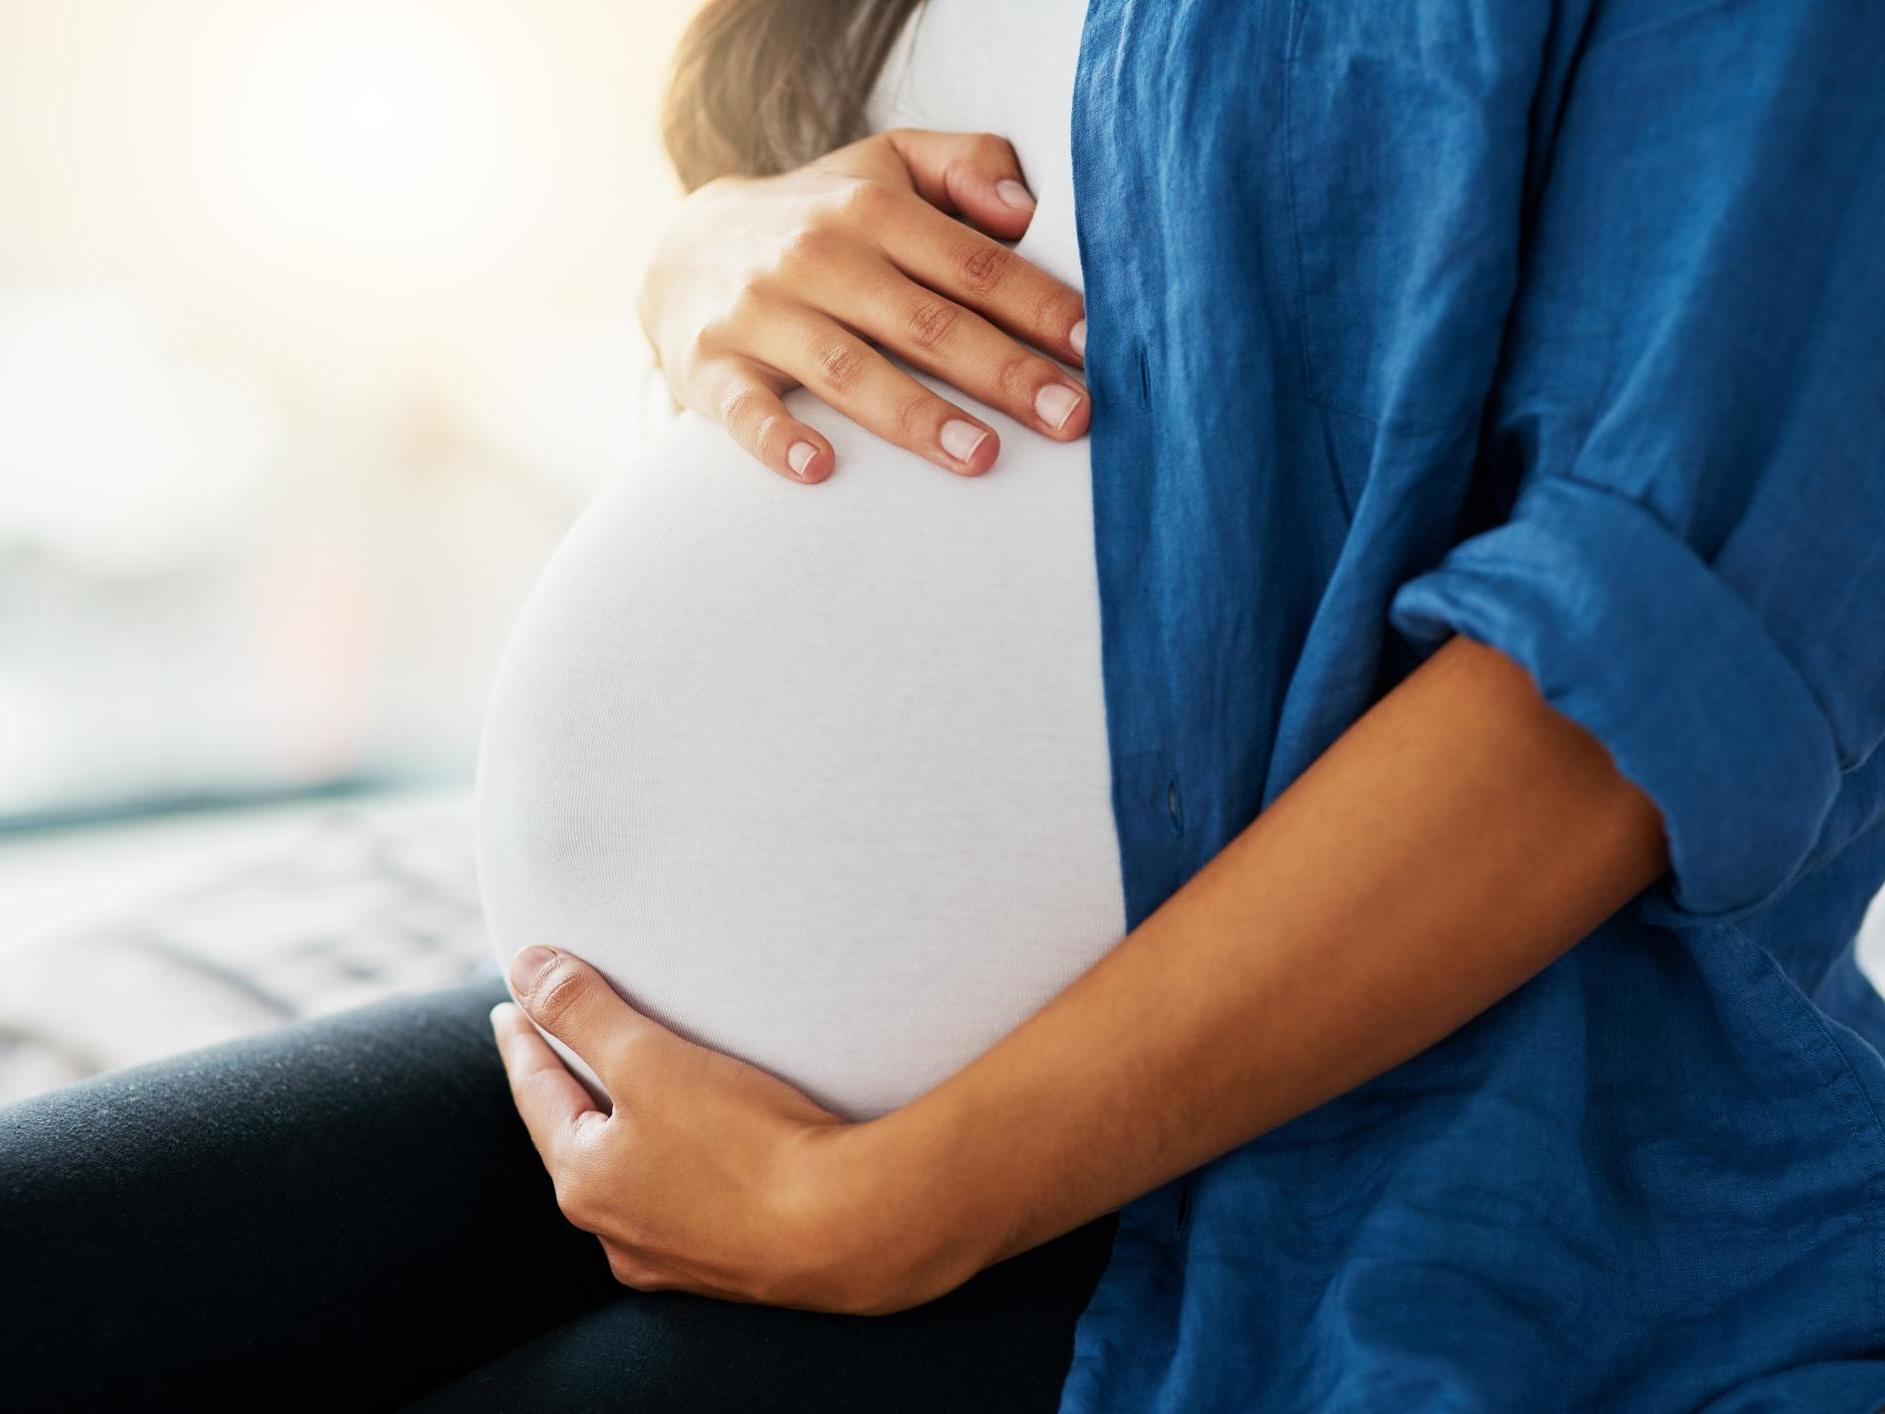 1 in 4 pregnant women have faced discrimination at work during pandemic, study shows